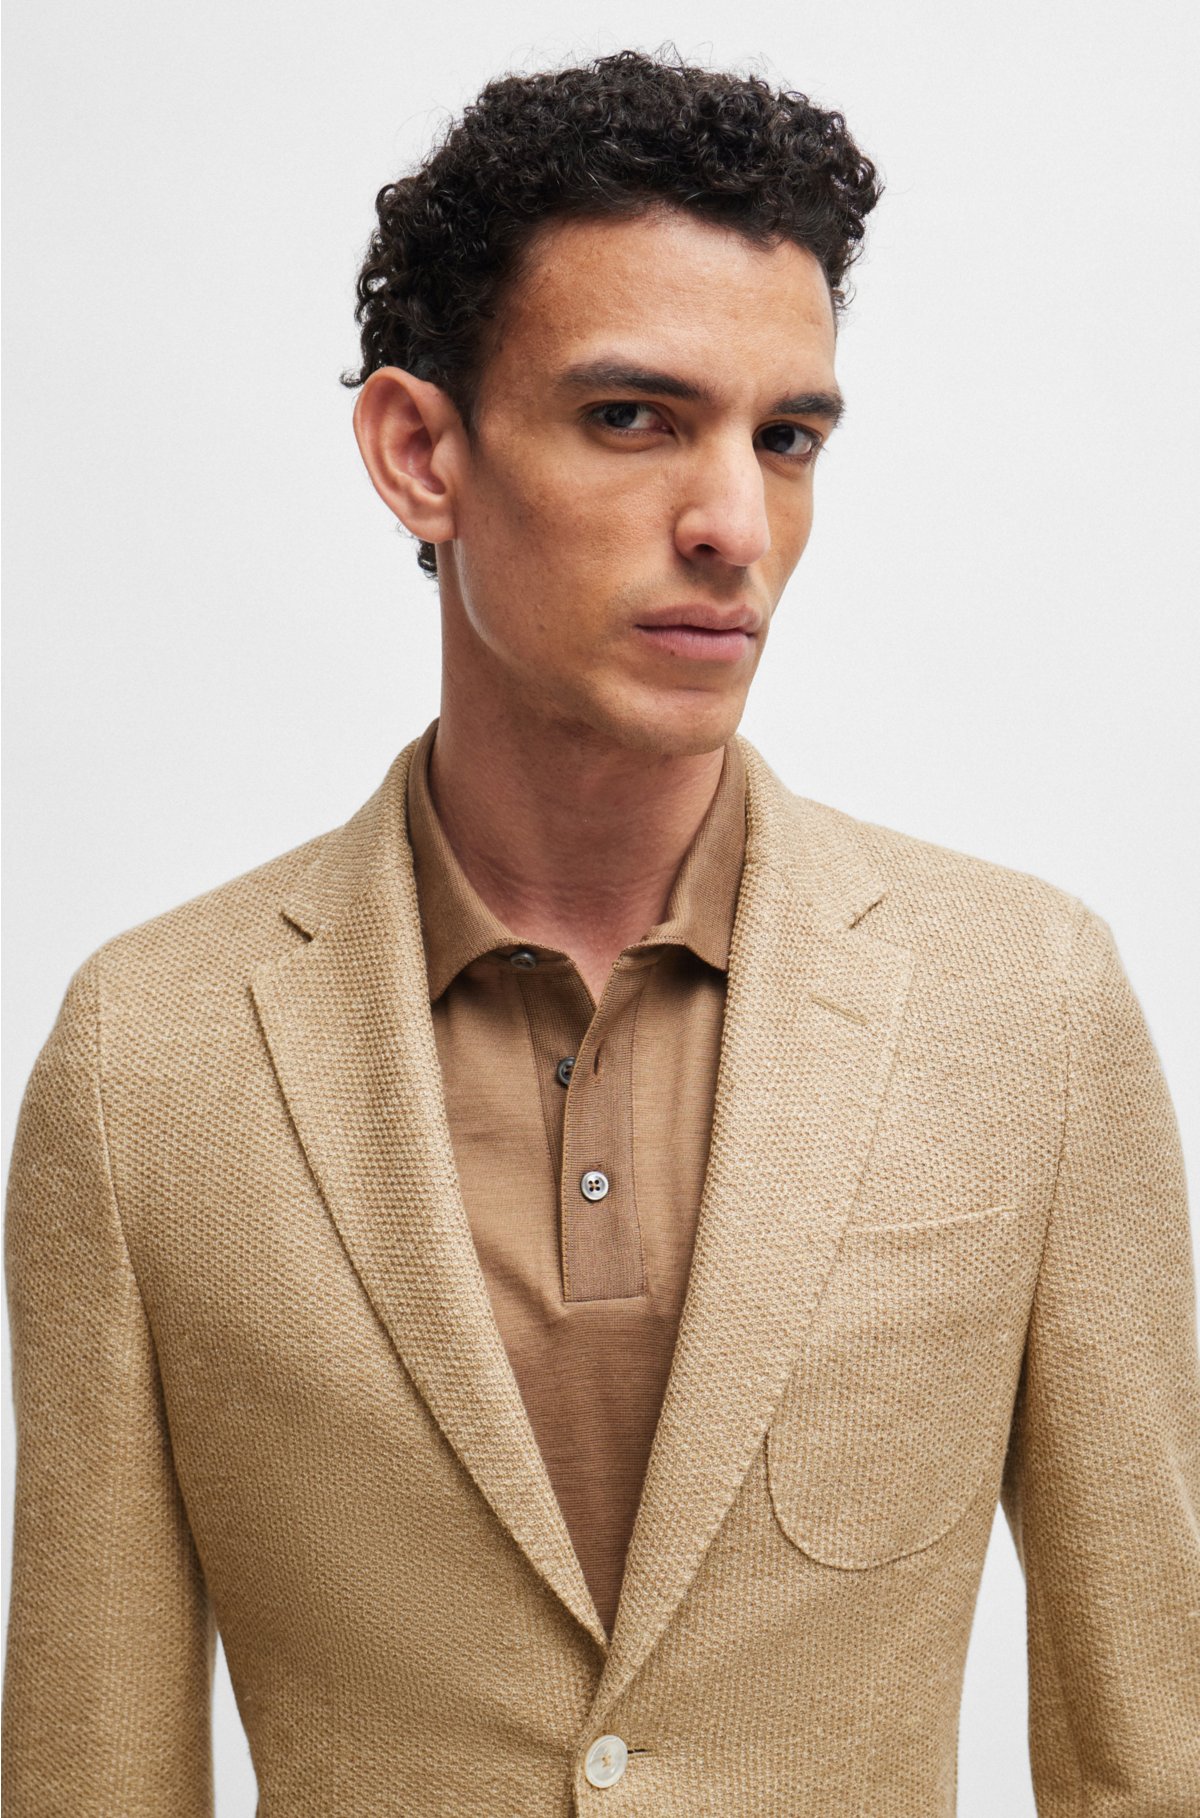 Slim-fit jacket in micro-patterned linen and cotton, Beige